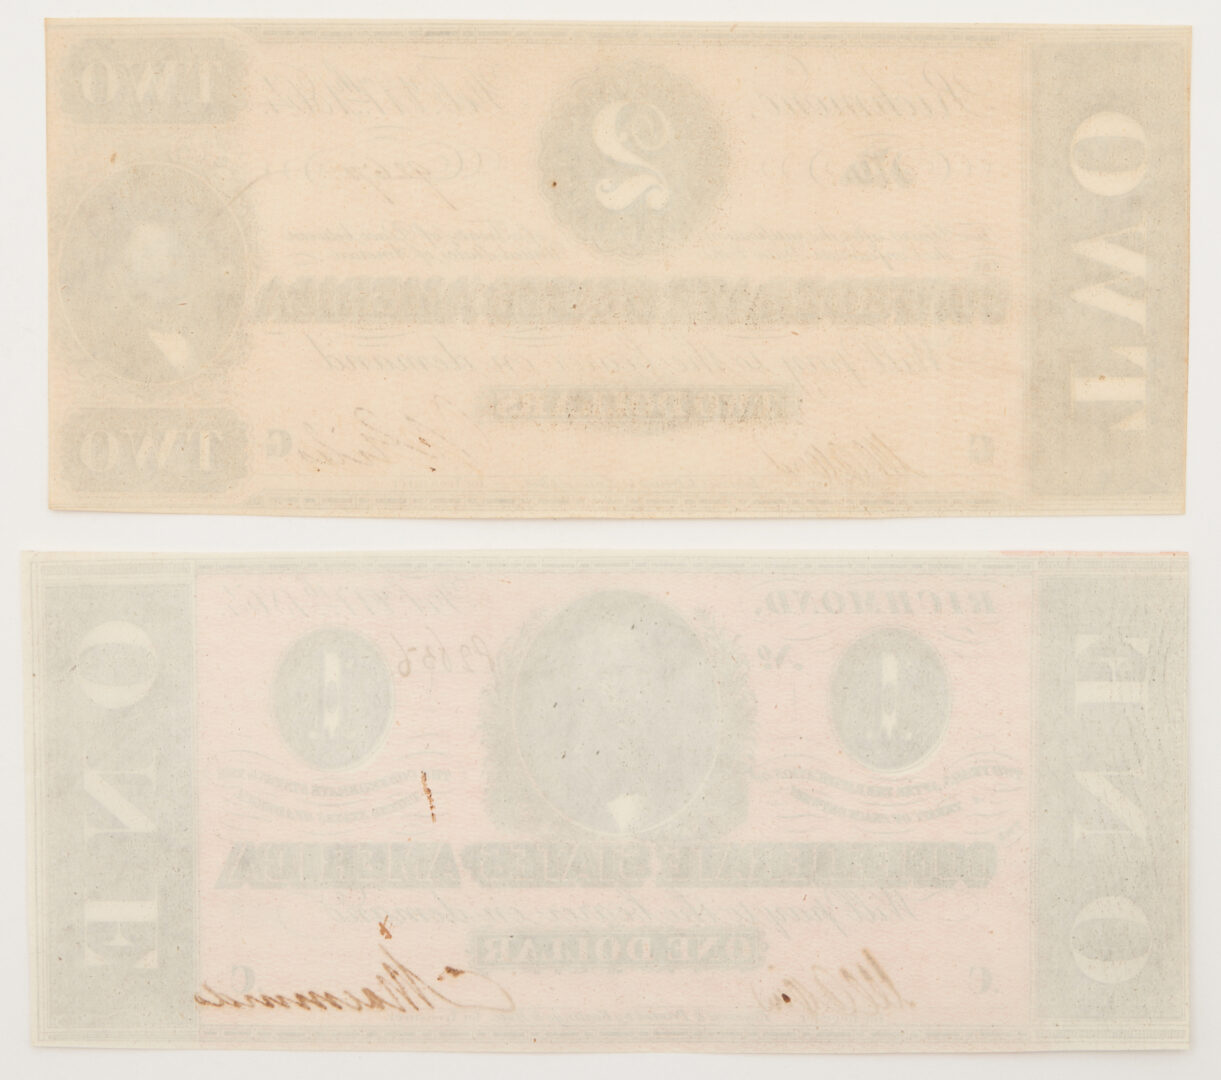 Lot 657: 5 CSA 1864 Currency Notes, incl. $500 Stonewall Note, $50 J. Davis Note